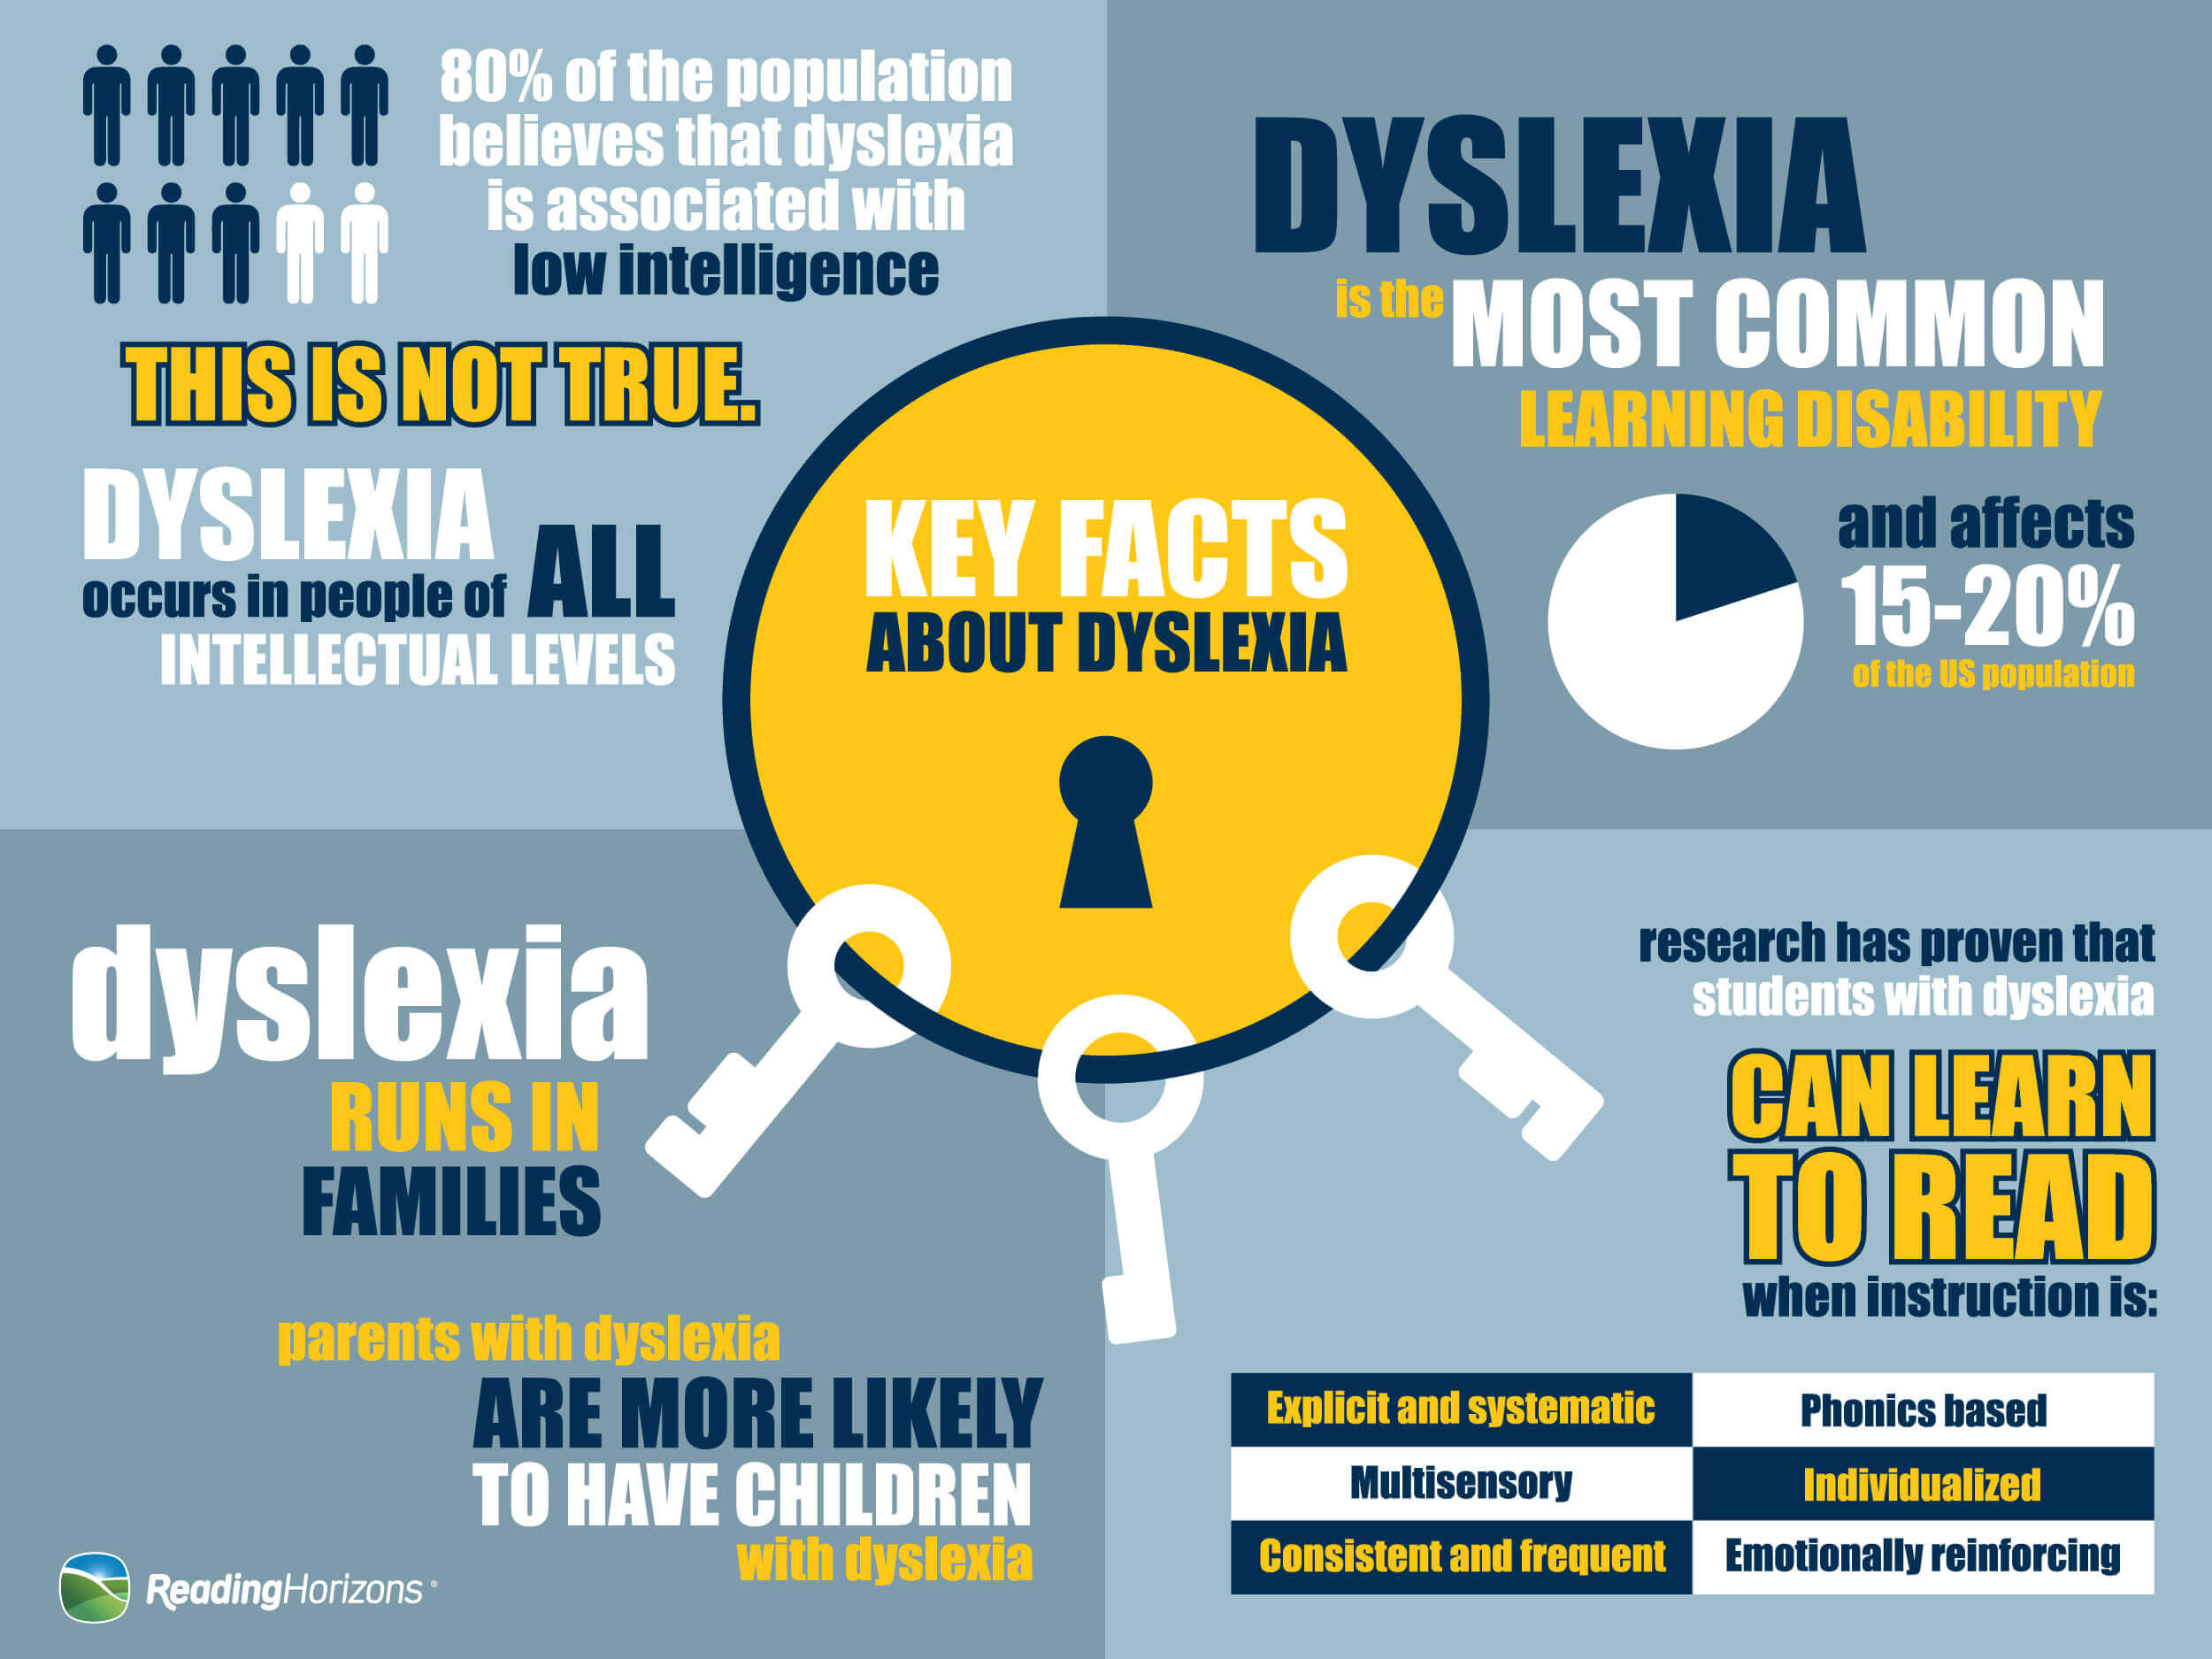 dyslexia and difficulties with study skills in higher education